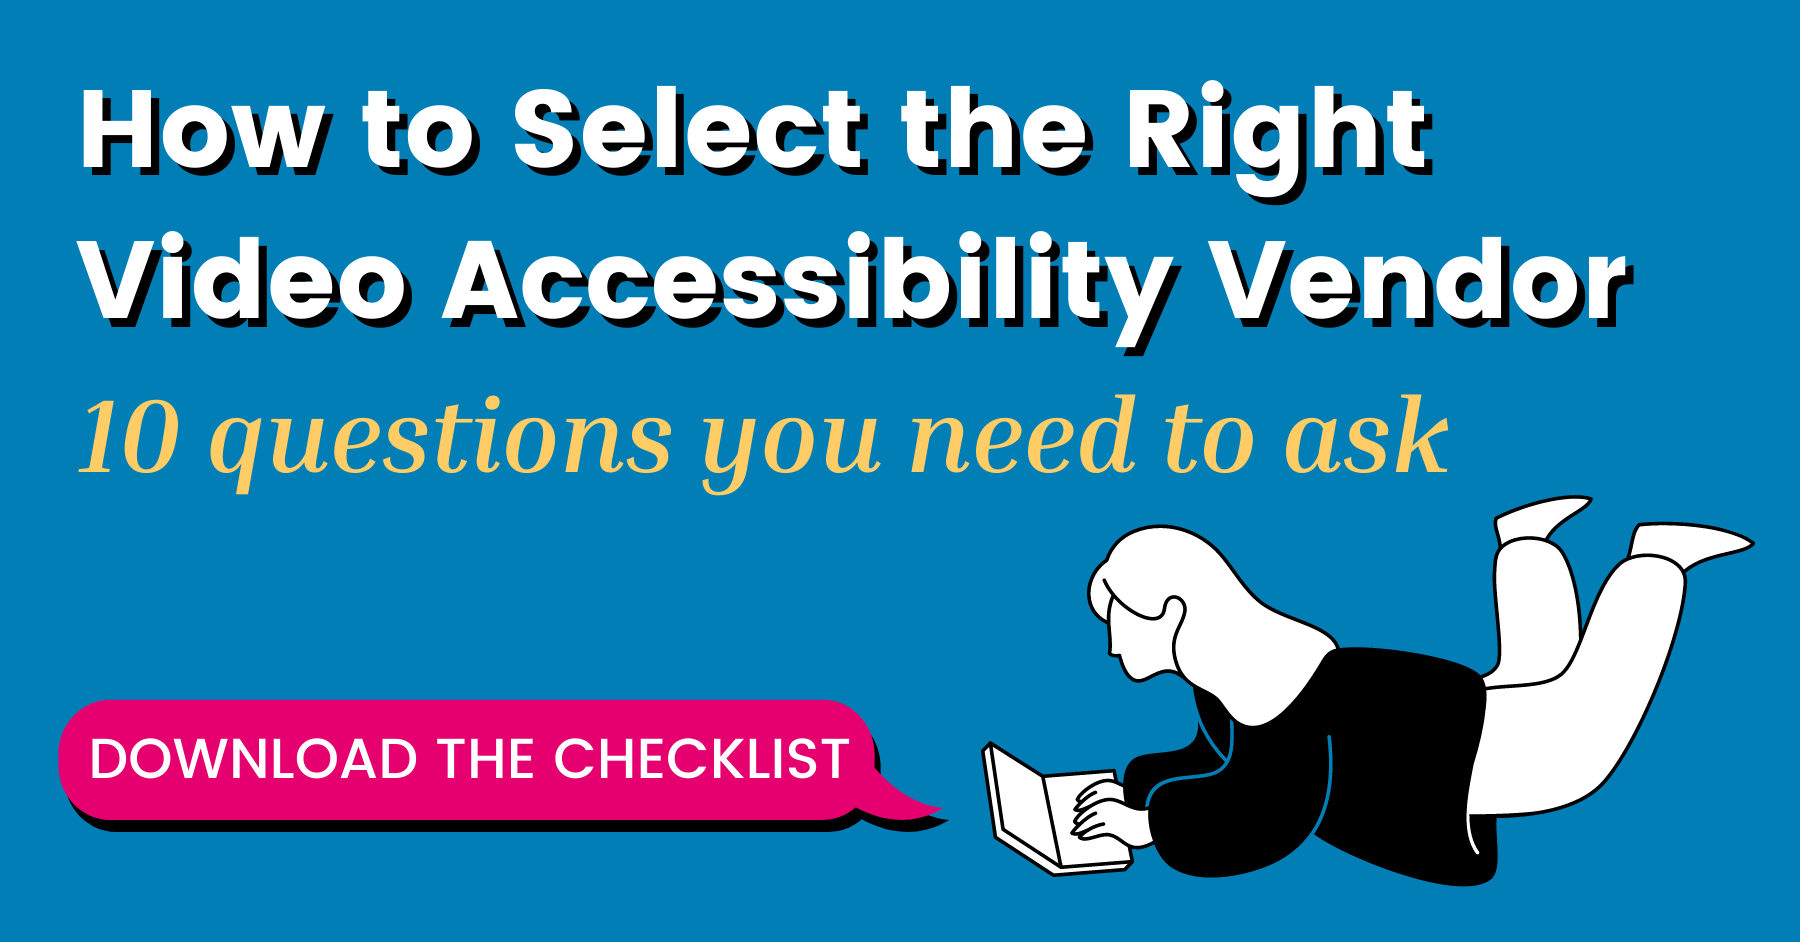 How to select the right video accessibility vendor, 10 questions you need to ask with link to downloadable checklist